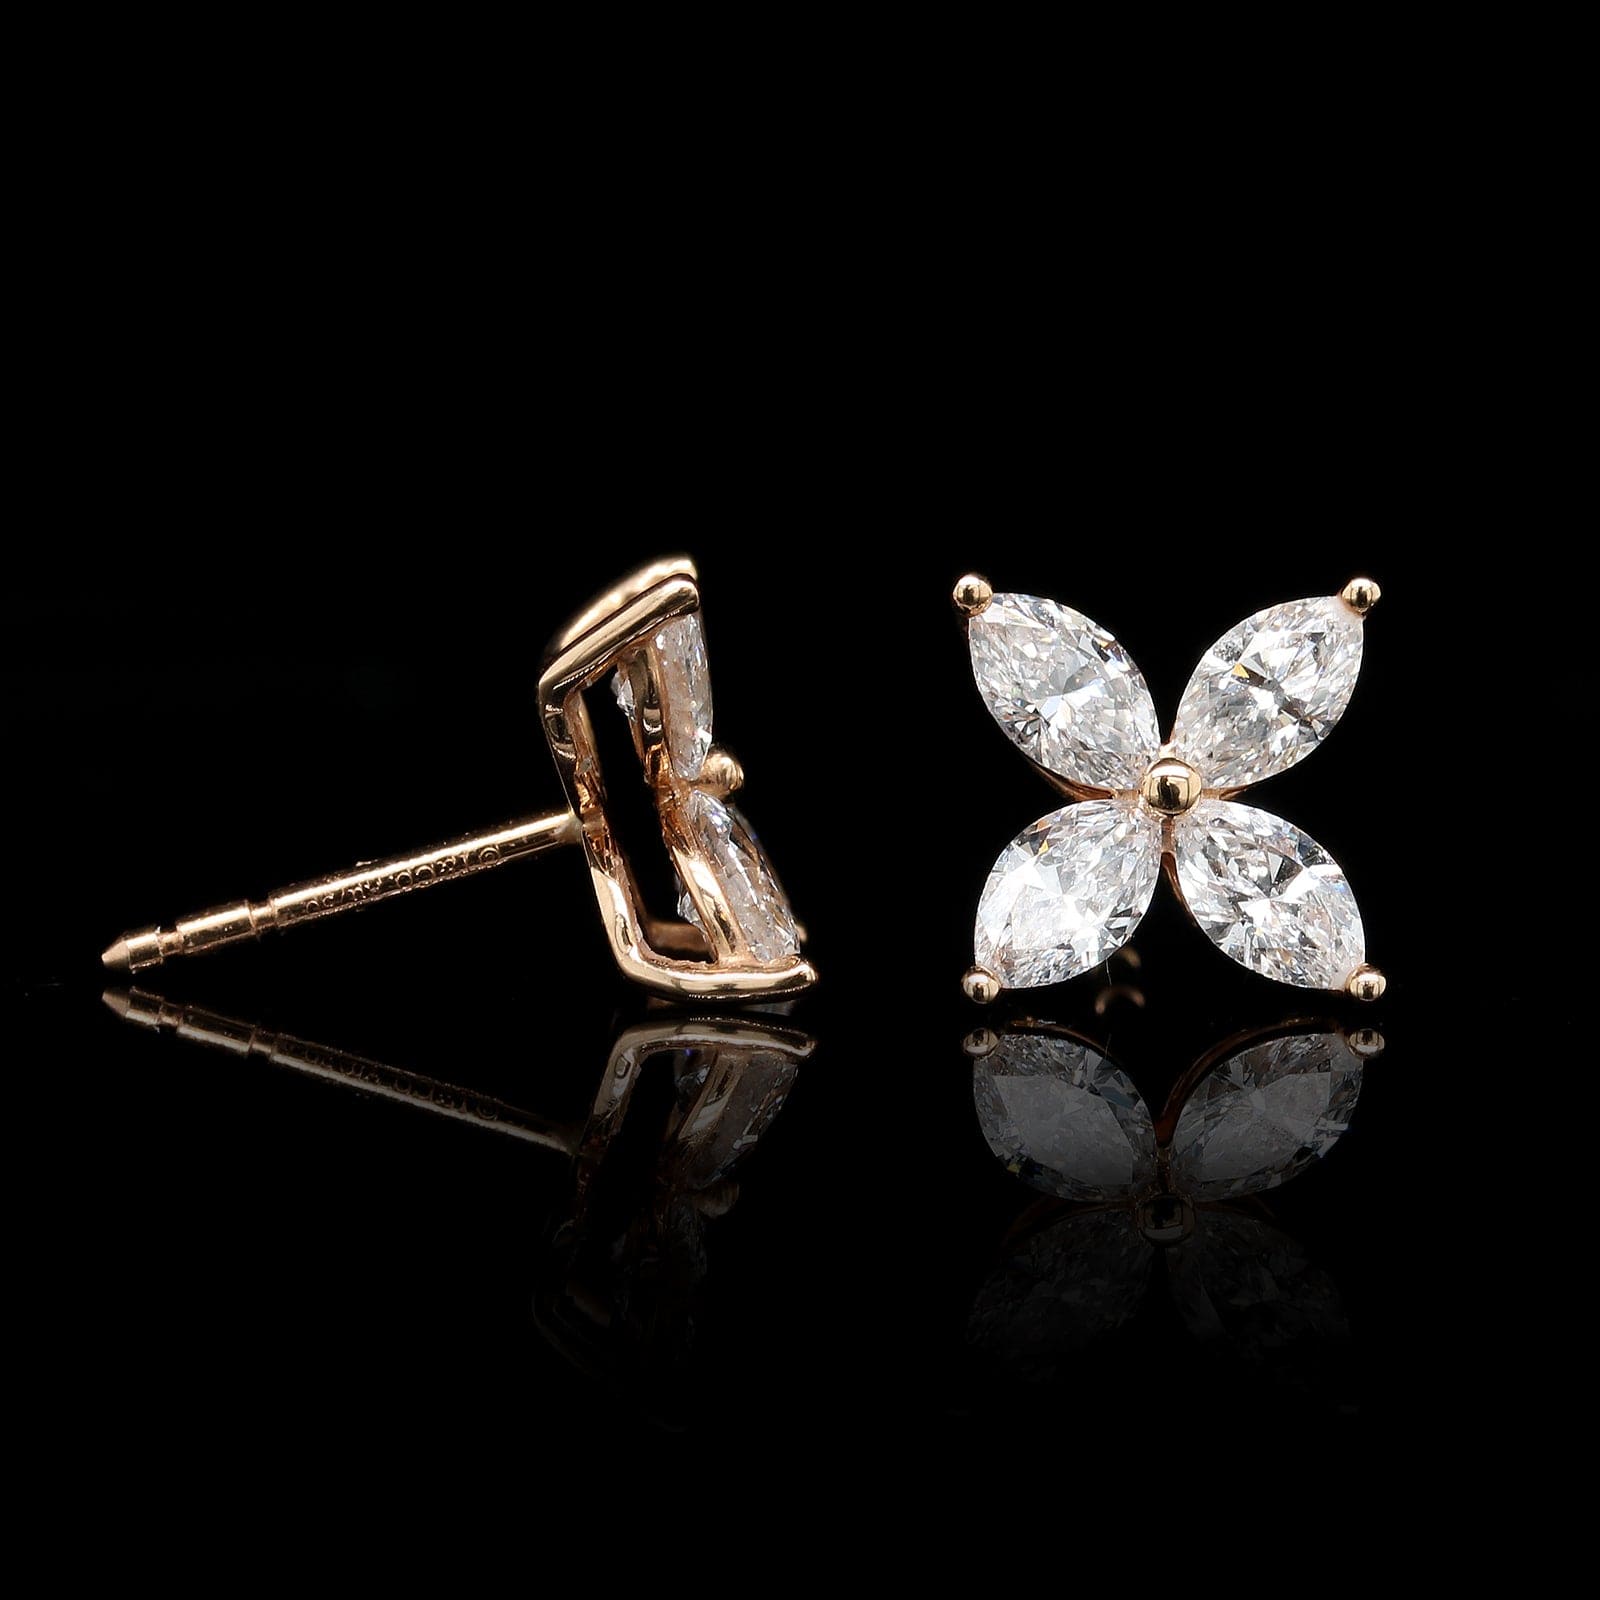 Tiffany & Co. 18K Rose Gold Estate and Diamond 'Victoria' Earrings